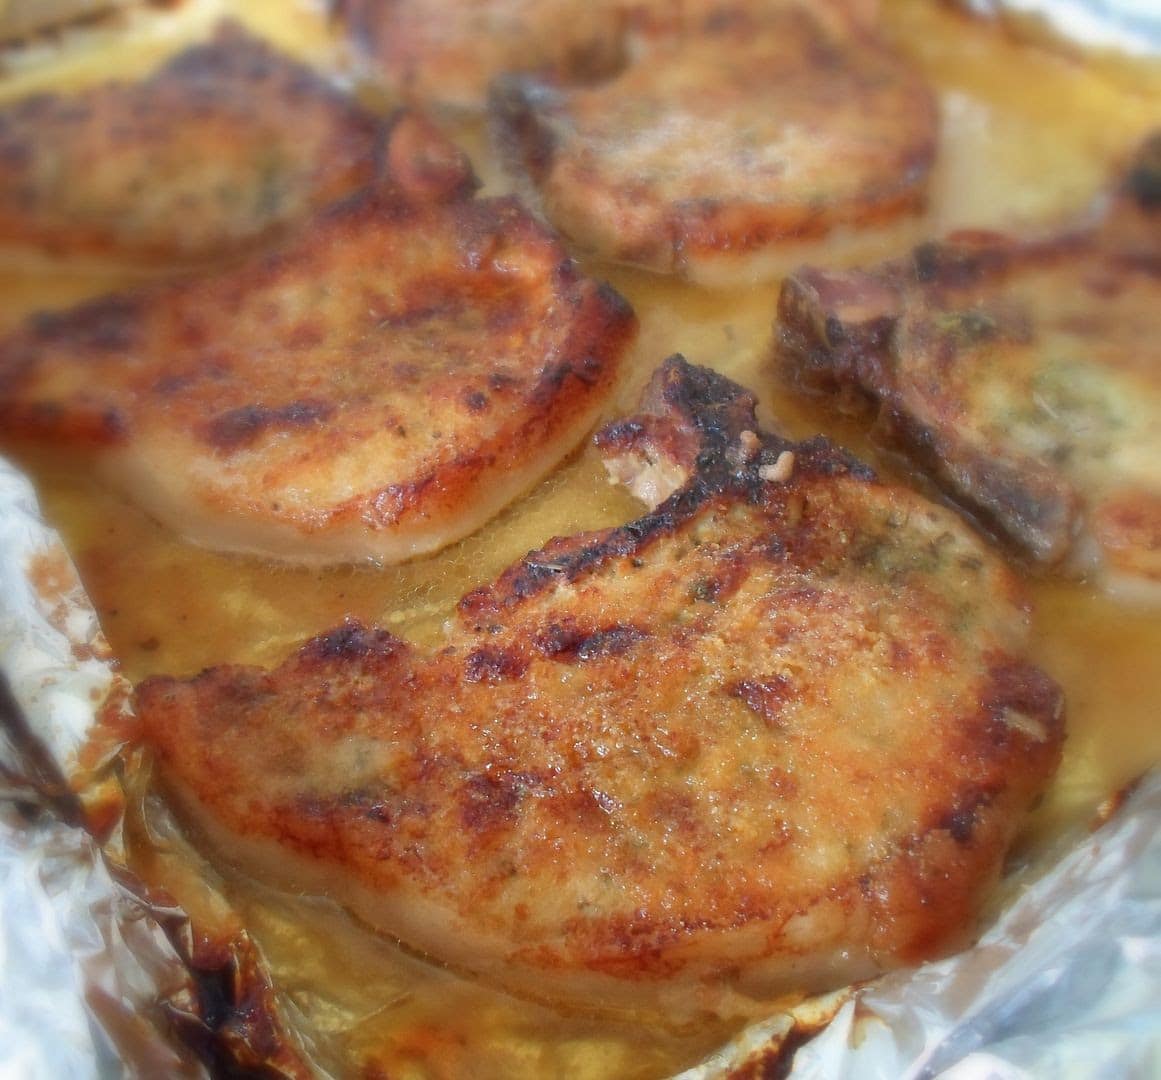 The English Kitchen: Oven Baked Breaded Pork Chops